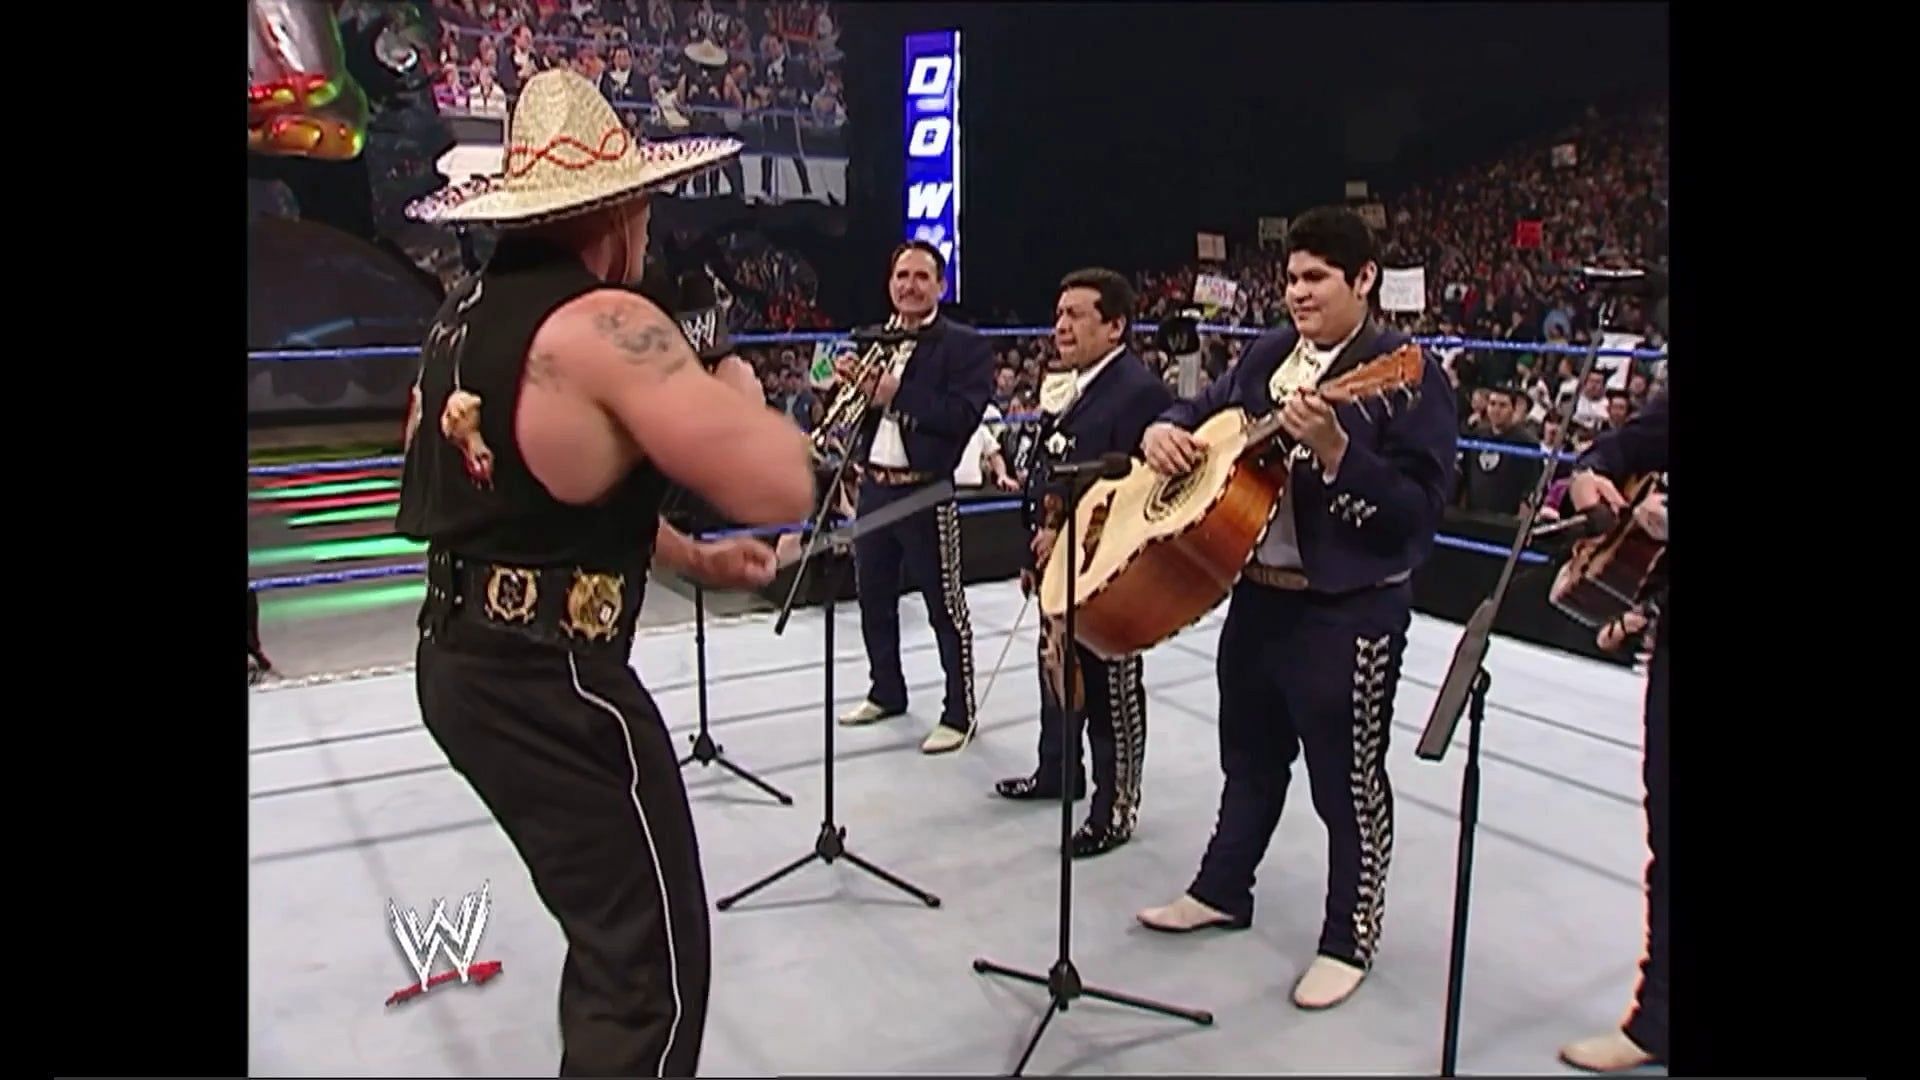 Lesnar enjoying his time with the mariachi band.